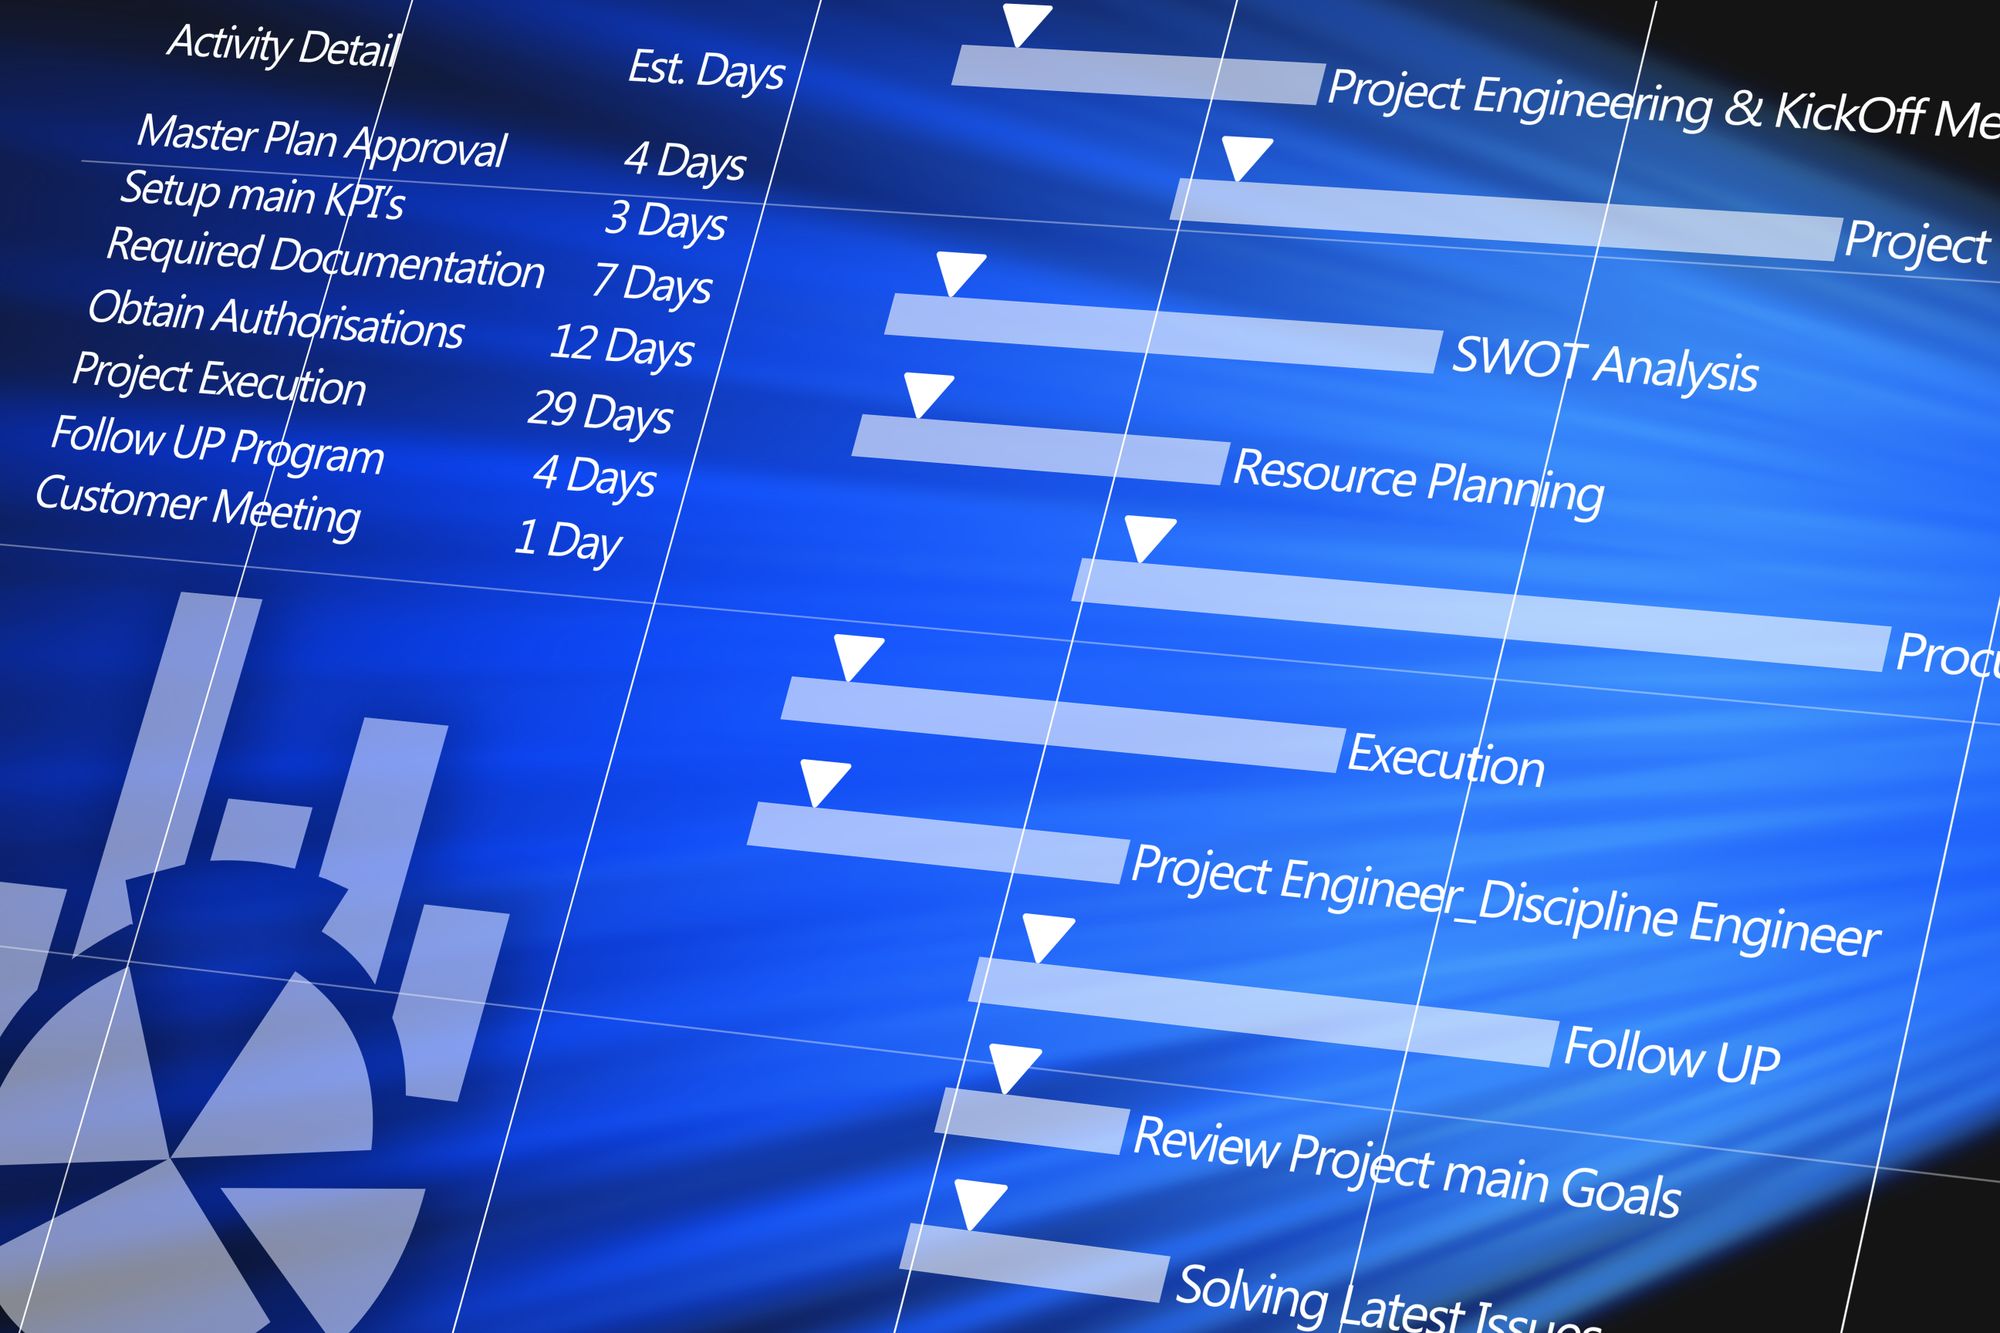                         Why do companies have an increased interest in project management in recent times?
                    